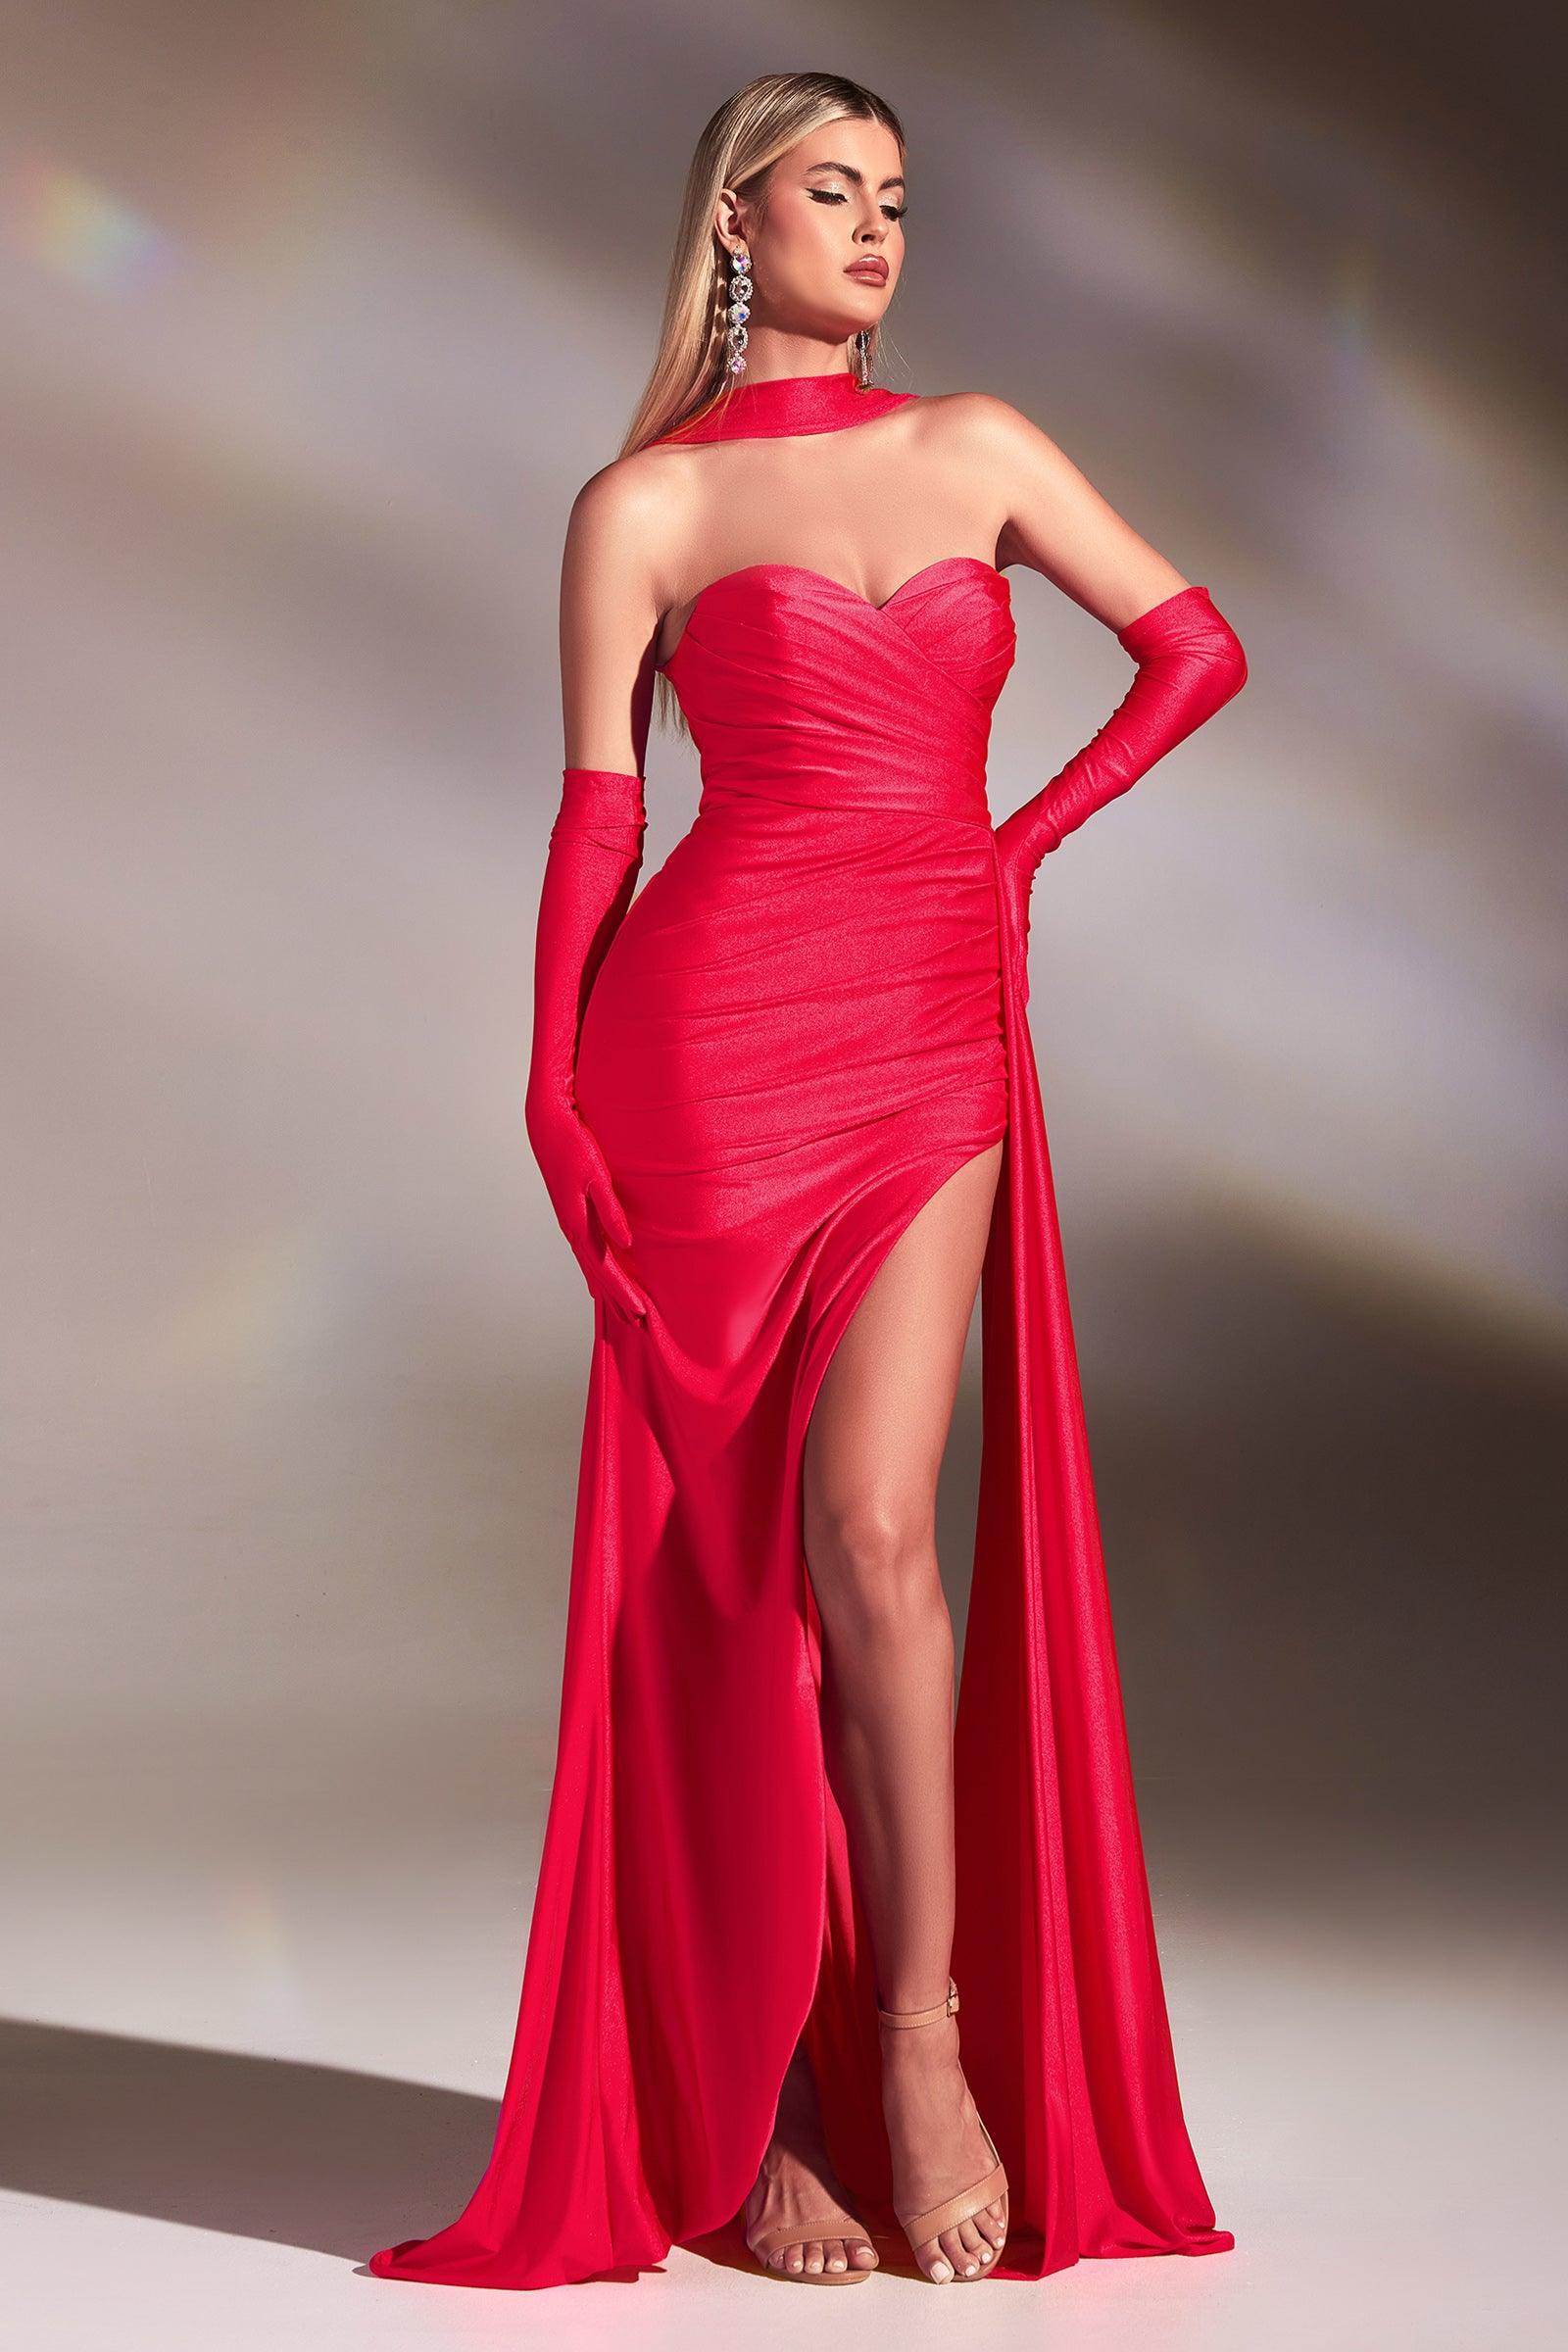 Cinderella Divine CD886 Strapless Ruched Dress In 10 Colors (Size